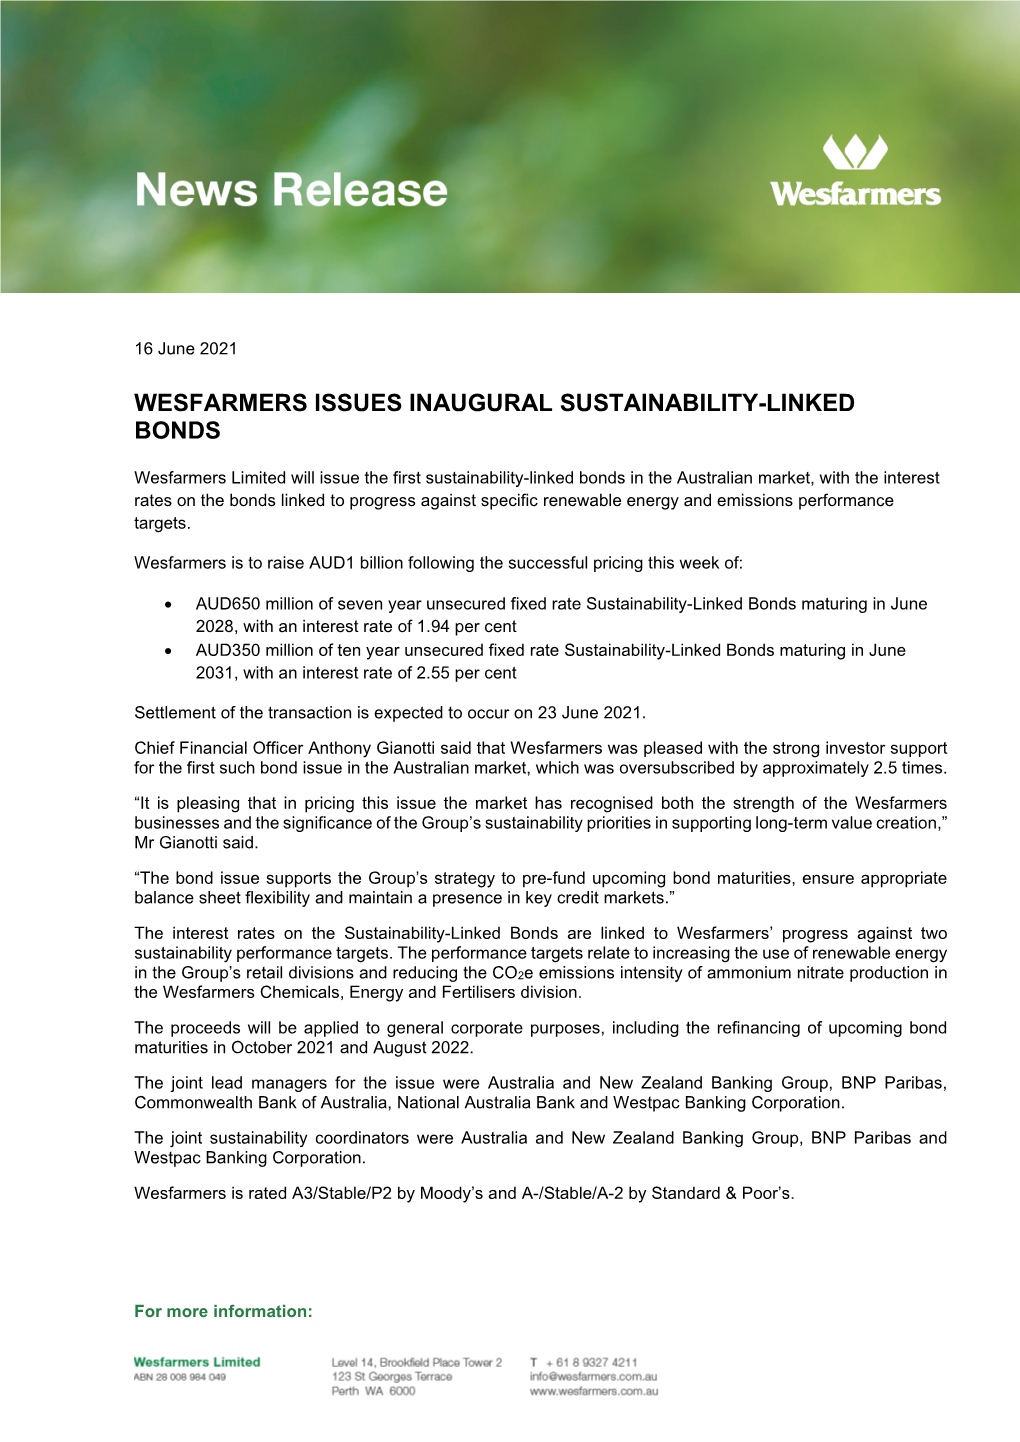 Wesfarmers Issues Inaugural Sustainability-Linked Bonds